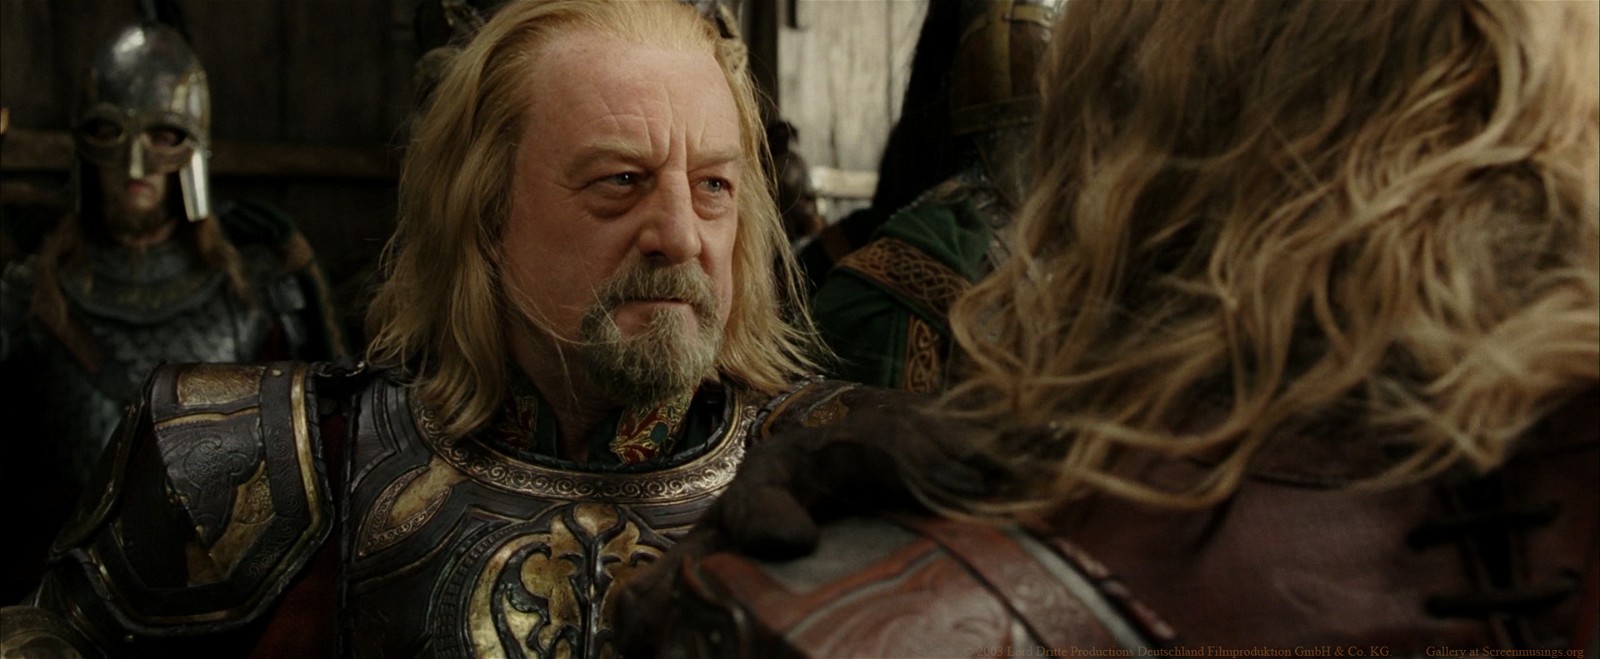 Bernard Hill as King Théoden in Lord of the Rings: The Return of the King 